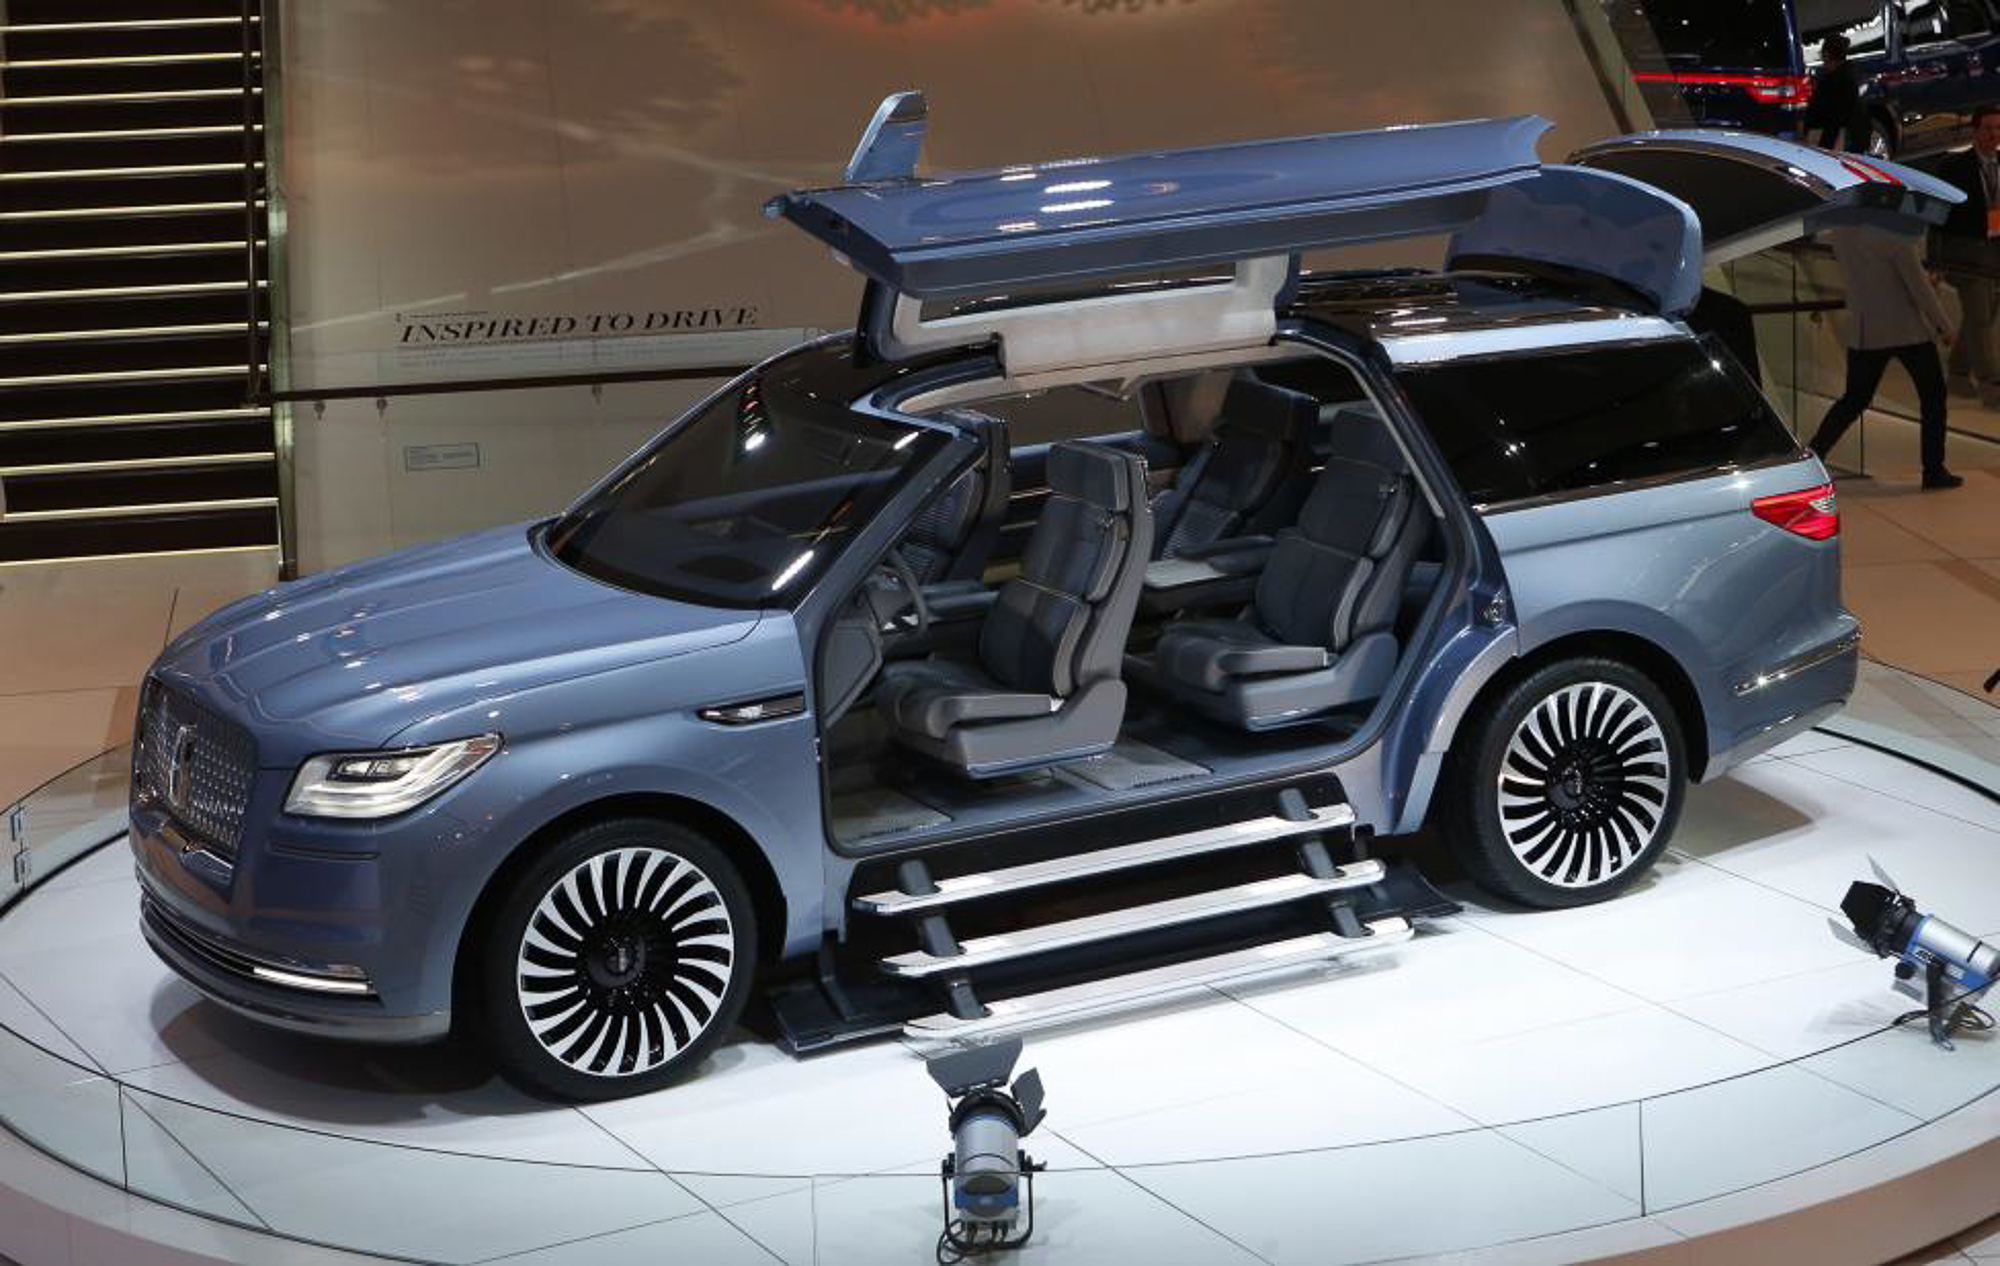 The Lincoln Navigator concept SUV. PHOTO: REUTERS